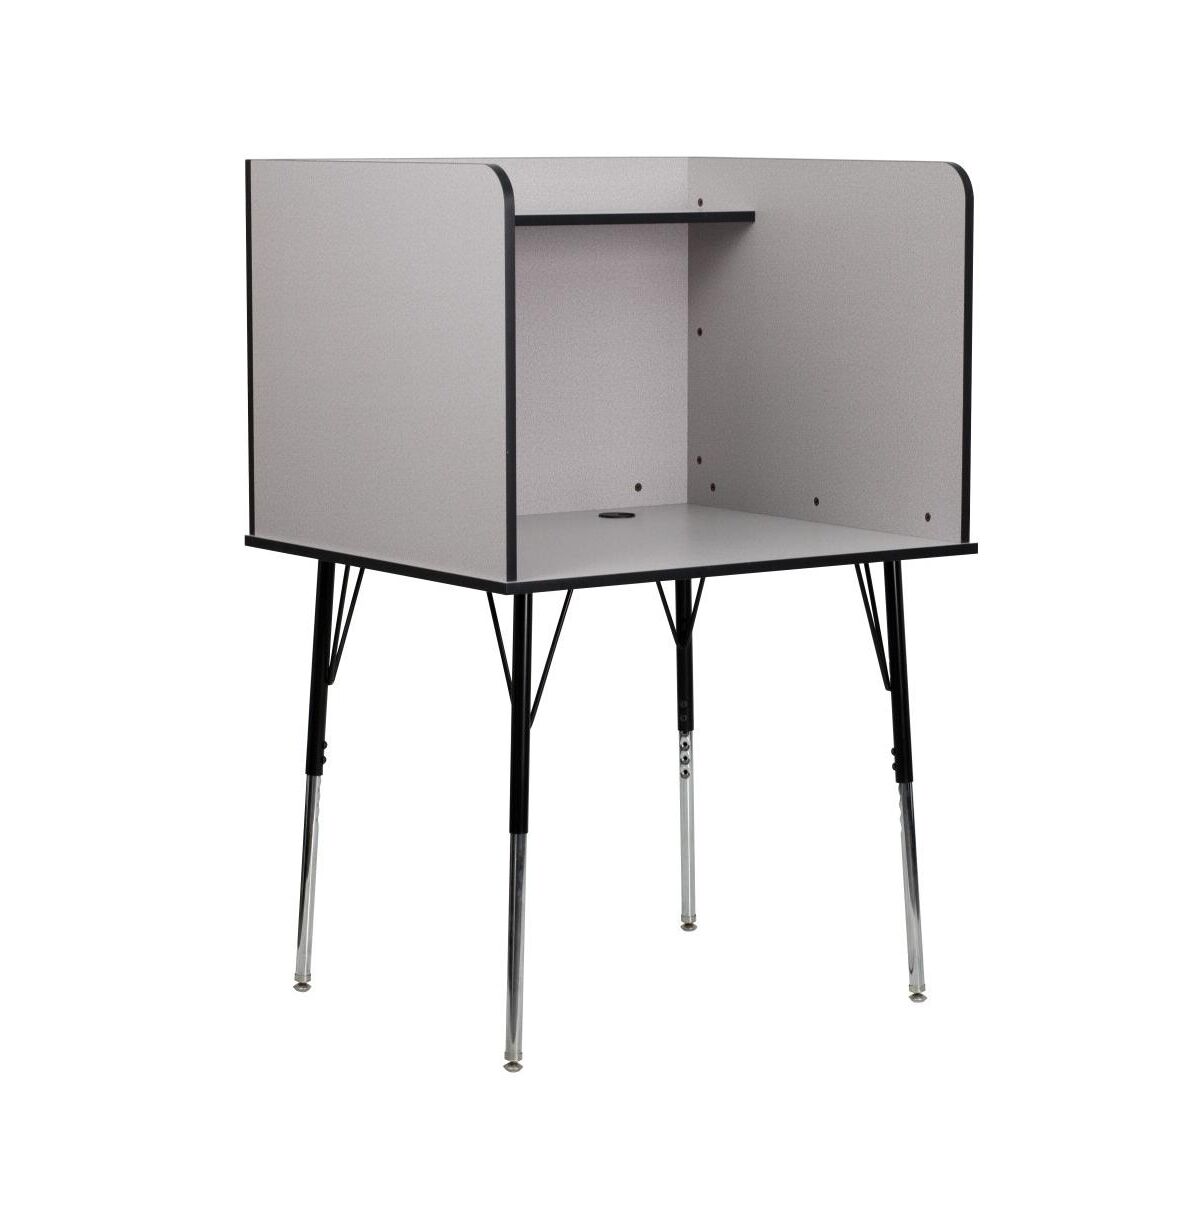 Emma+oliver Stand-Alone Study Carrel With Height Adjustable Legs - Nebula grey